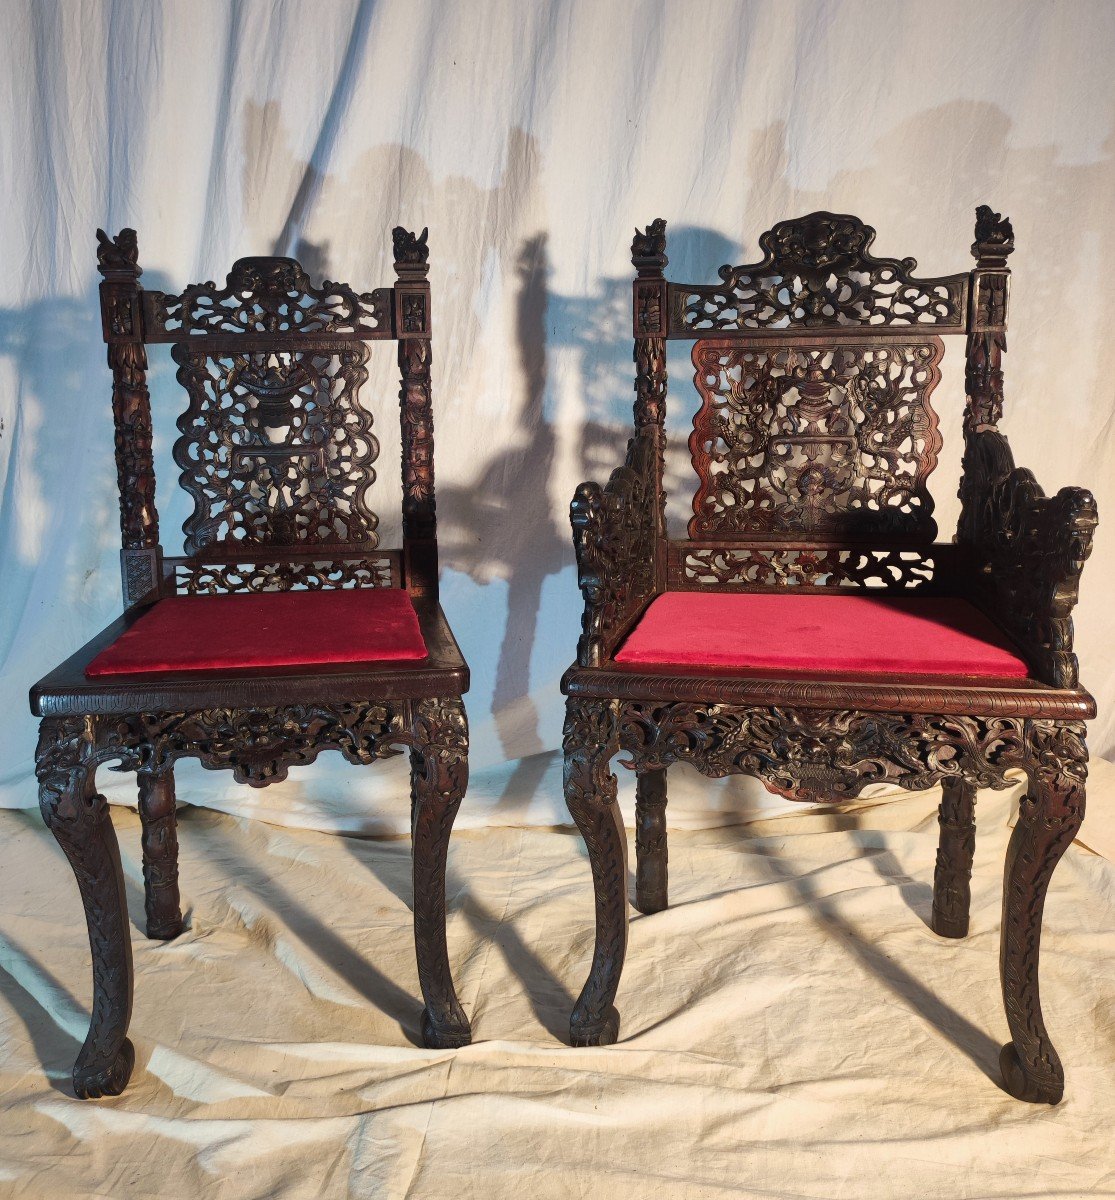 Chinese Armchair With Decors Of European Influence 19 Centuries